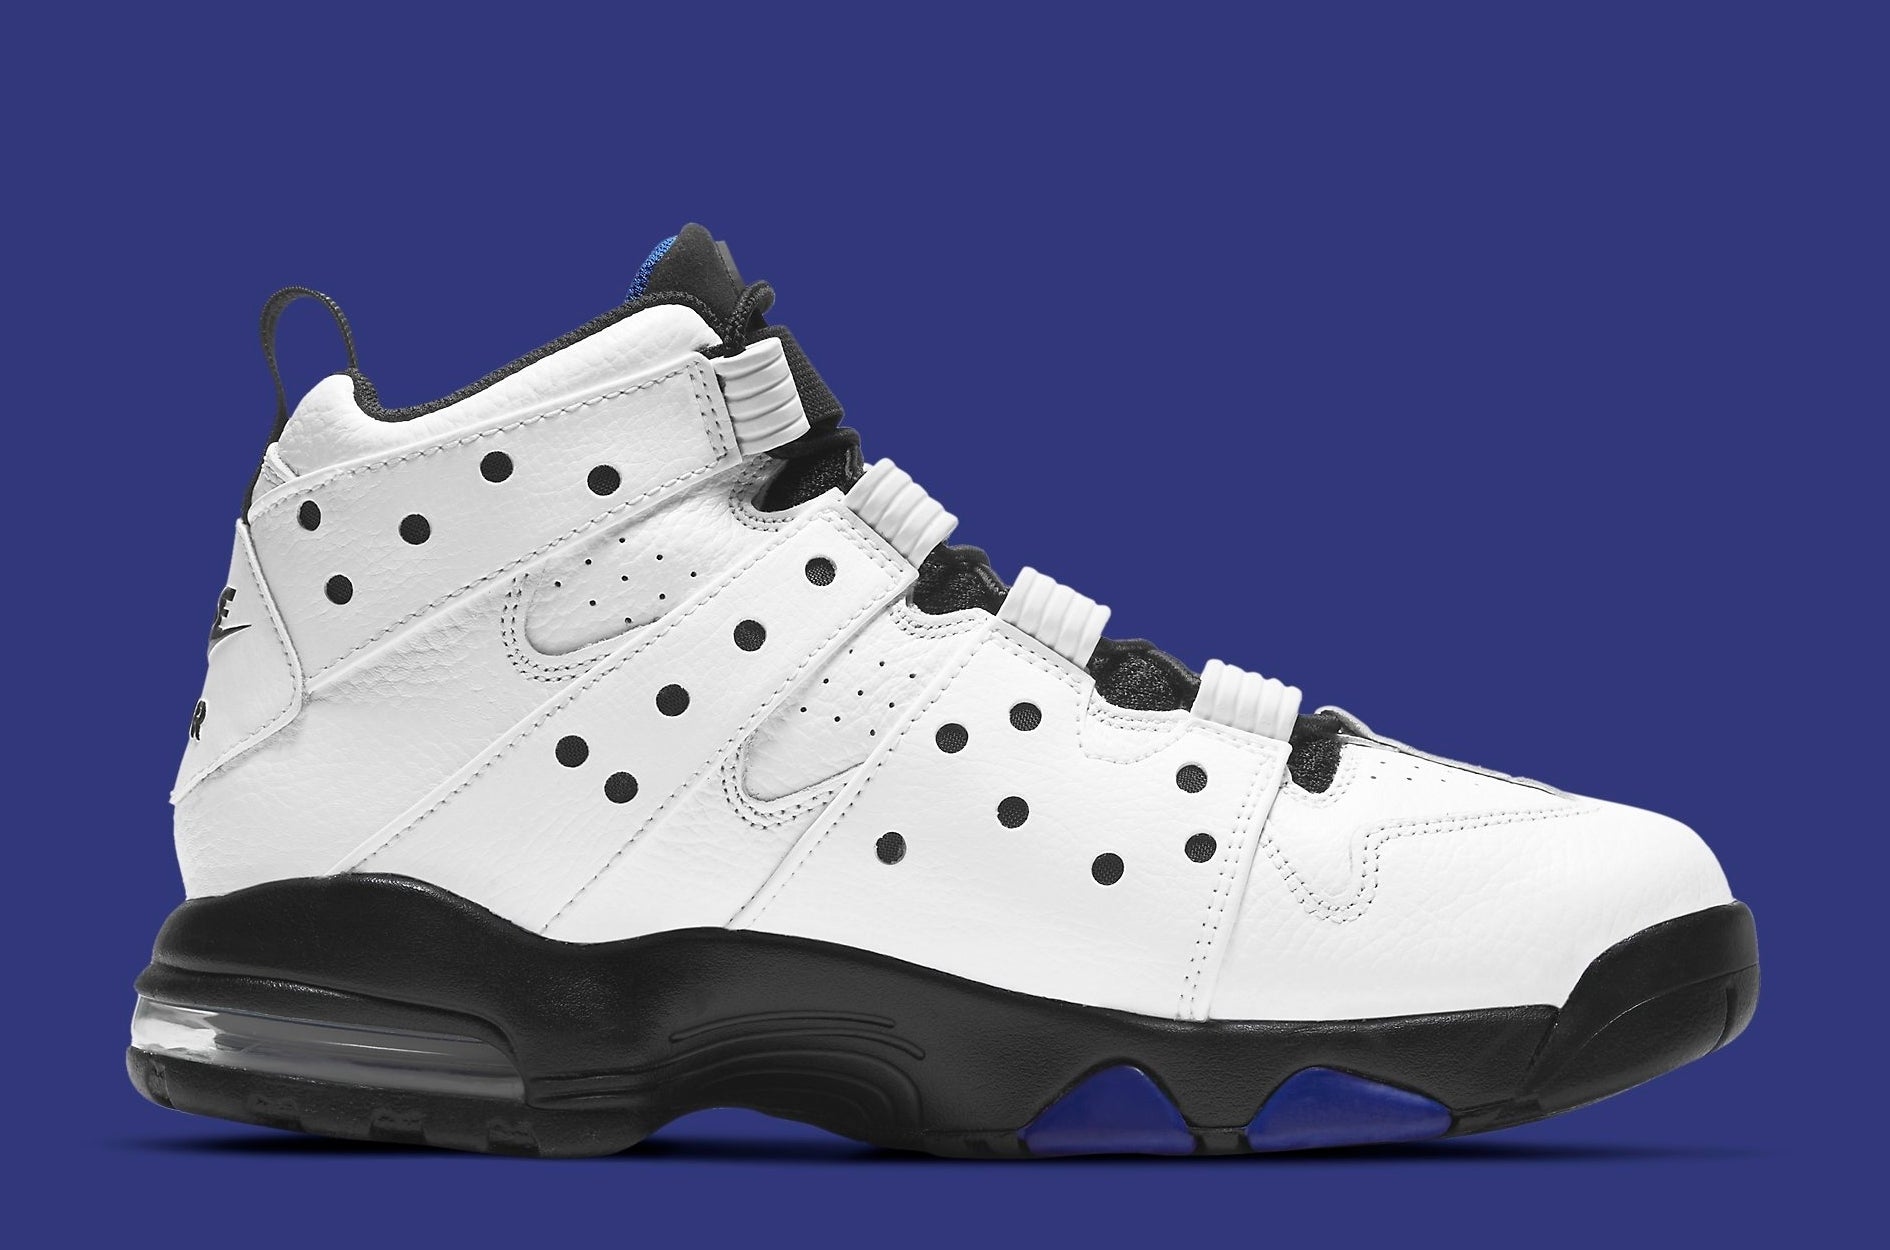 The Nike Air Max CB 94 Gets an Olympic Makeover